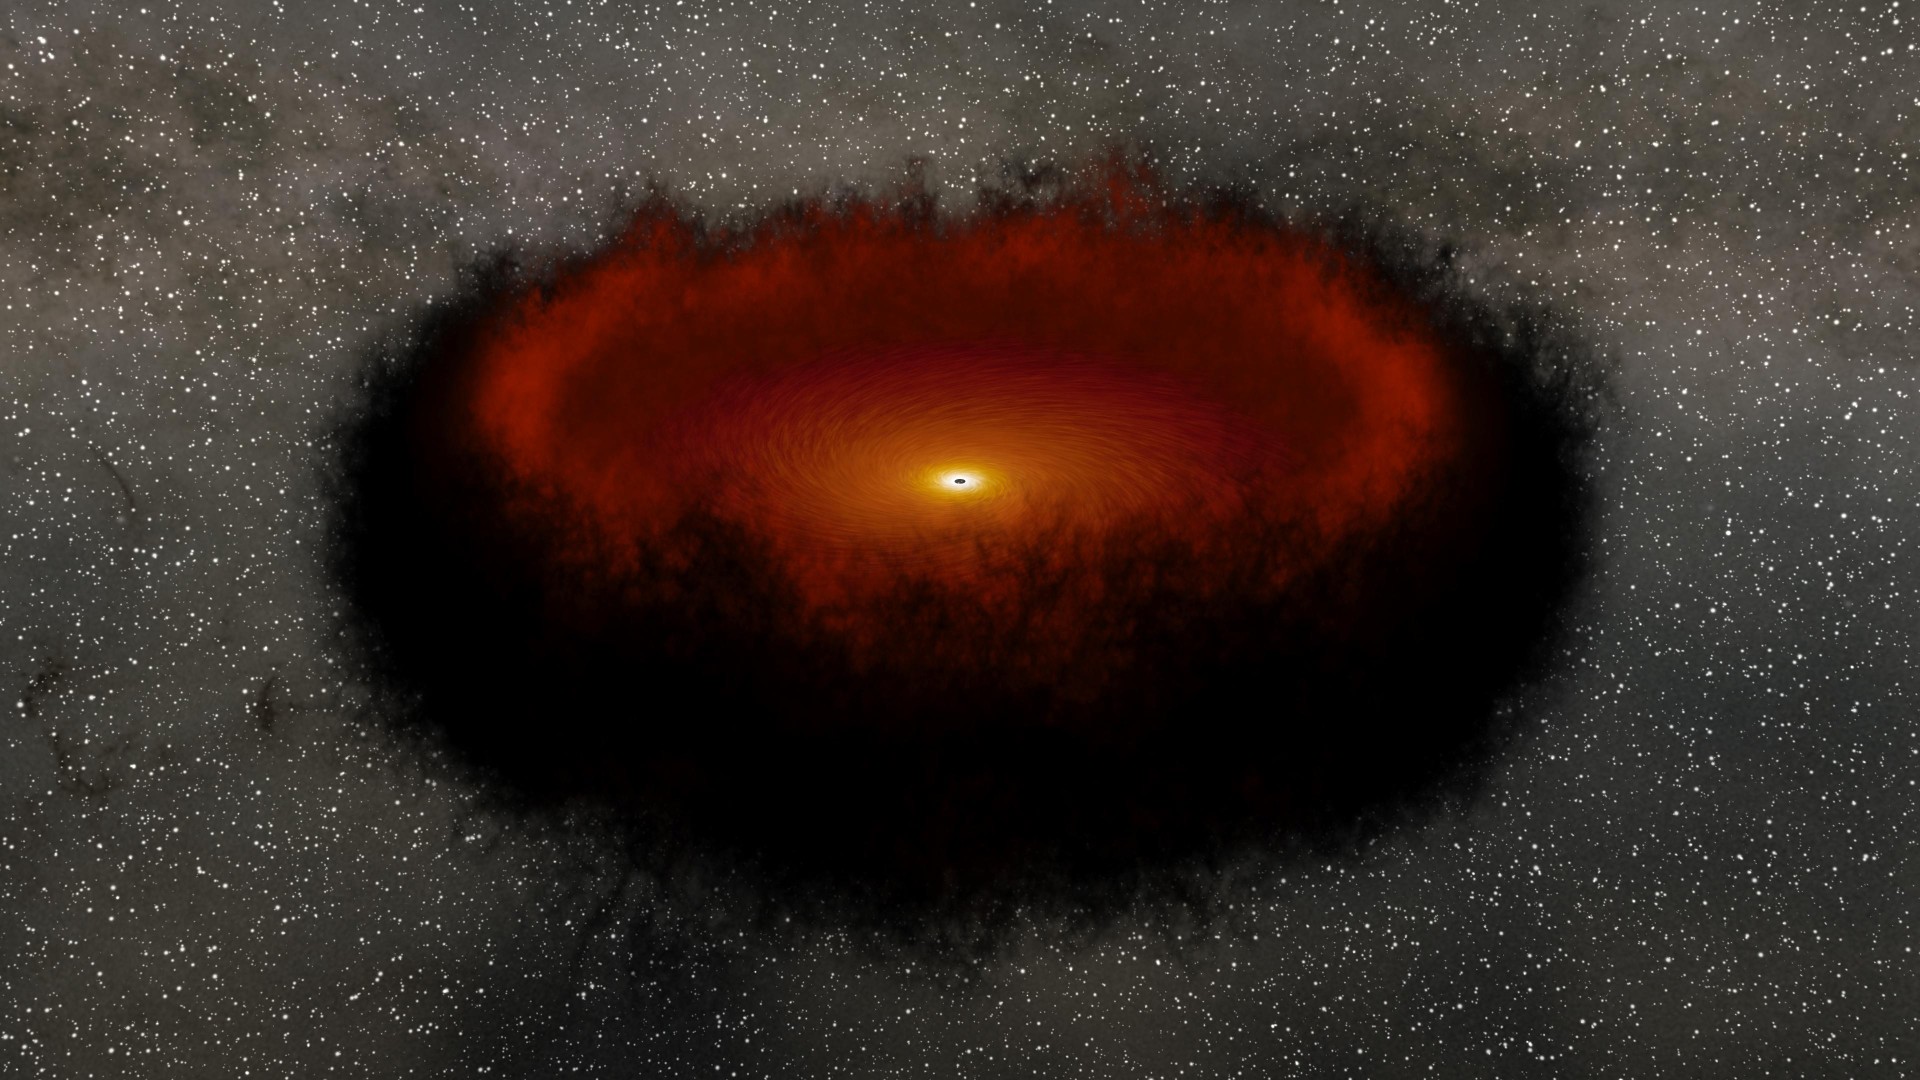 Black holes may be swallowing invisible matter that slows the movement of stars